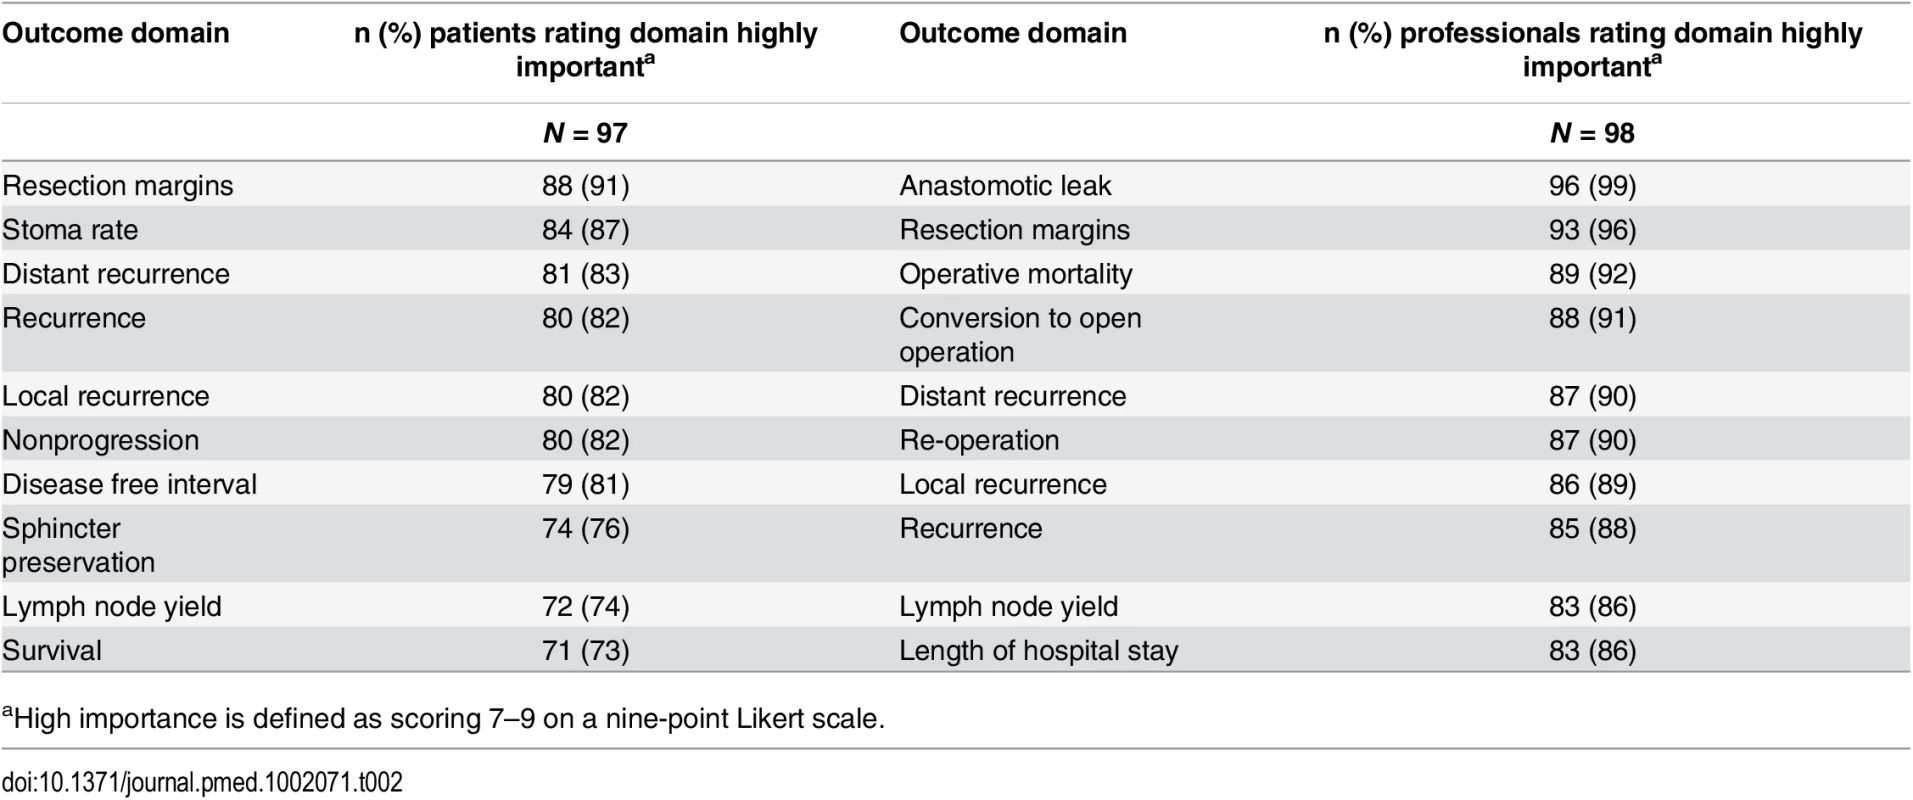 Top ten highest scored outcome domains after Round 1, by stakeholder group.